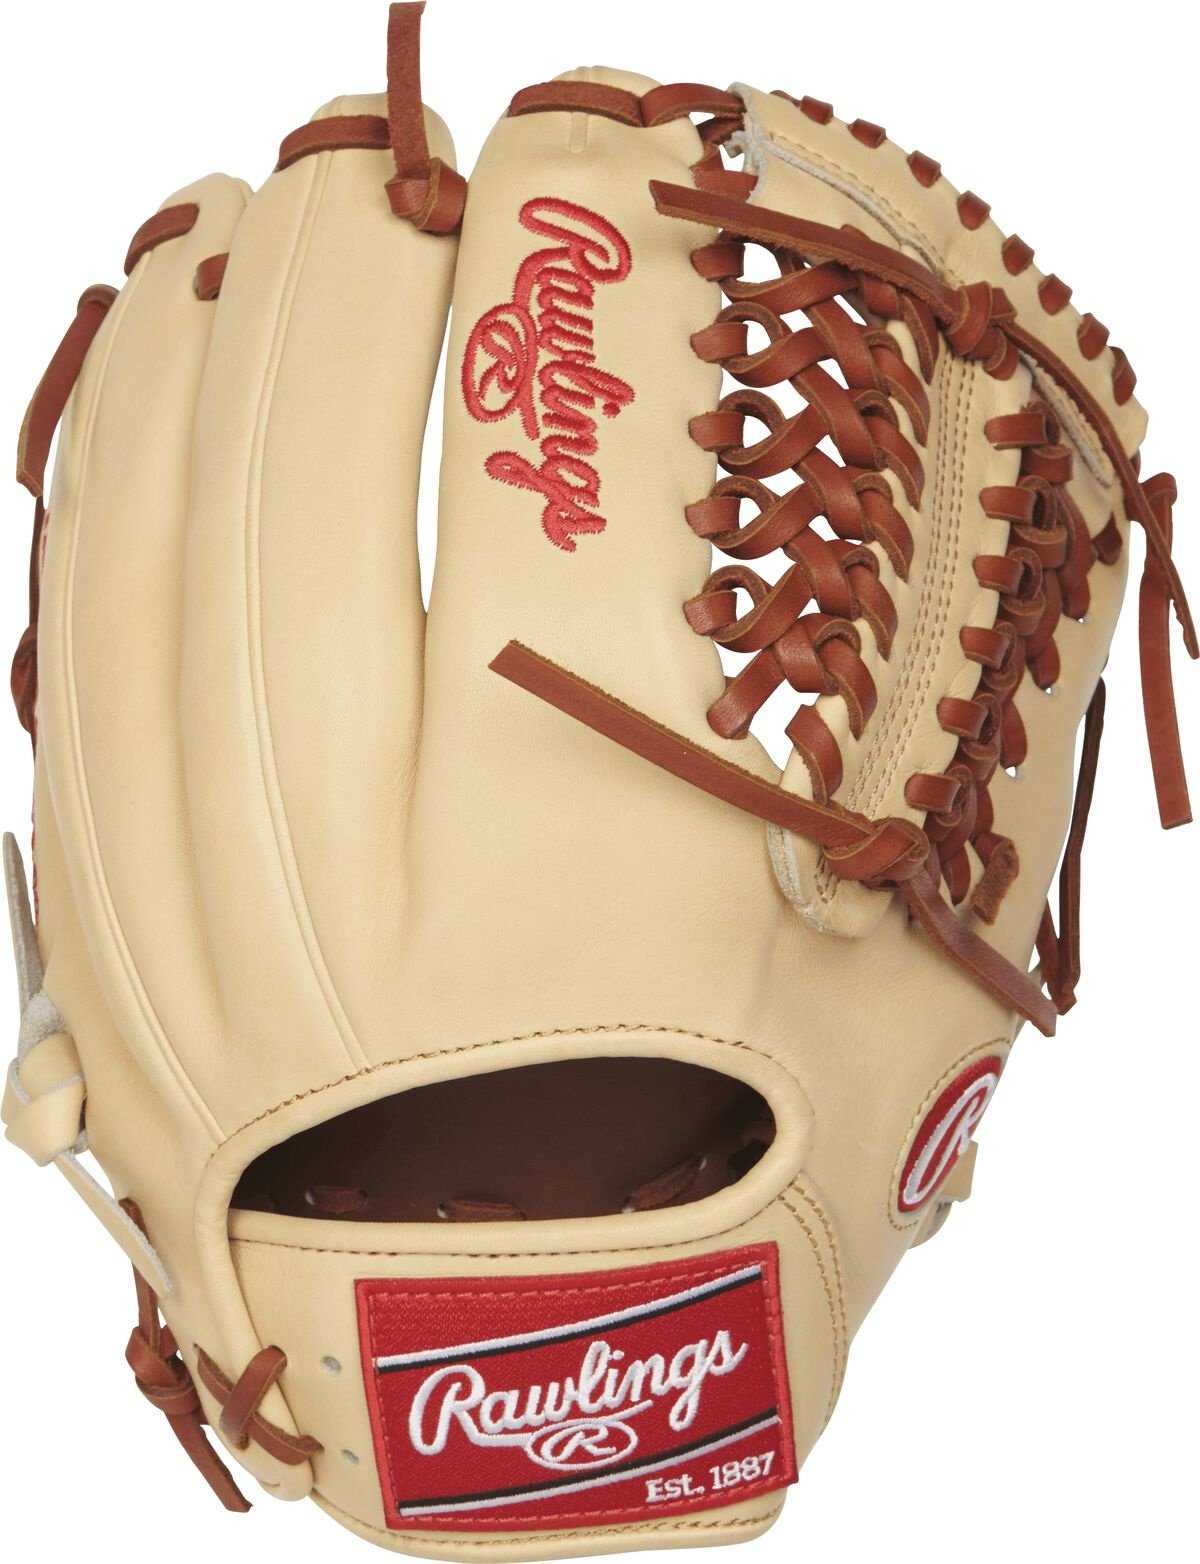 Rawlings Heart of the Hide 11.75" Modified Trapeze Infield Pitcher Glove PRO205-4CT - Cork Tan - HIT a Double